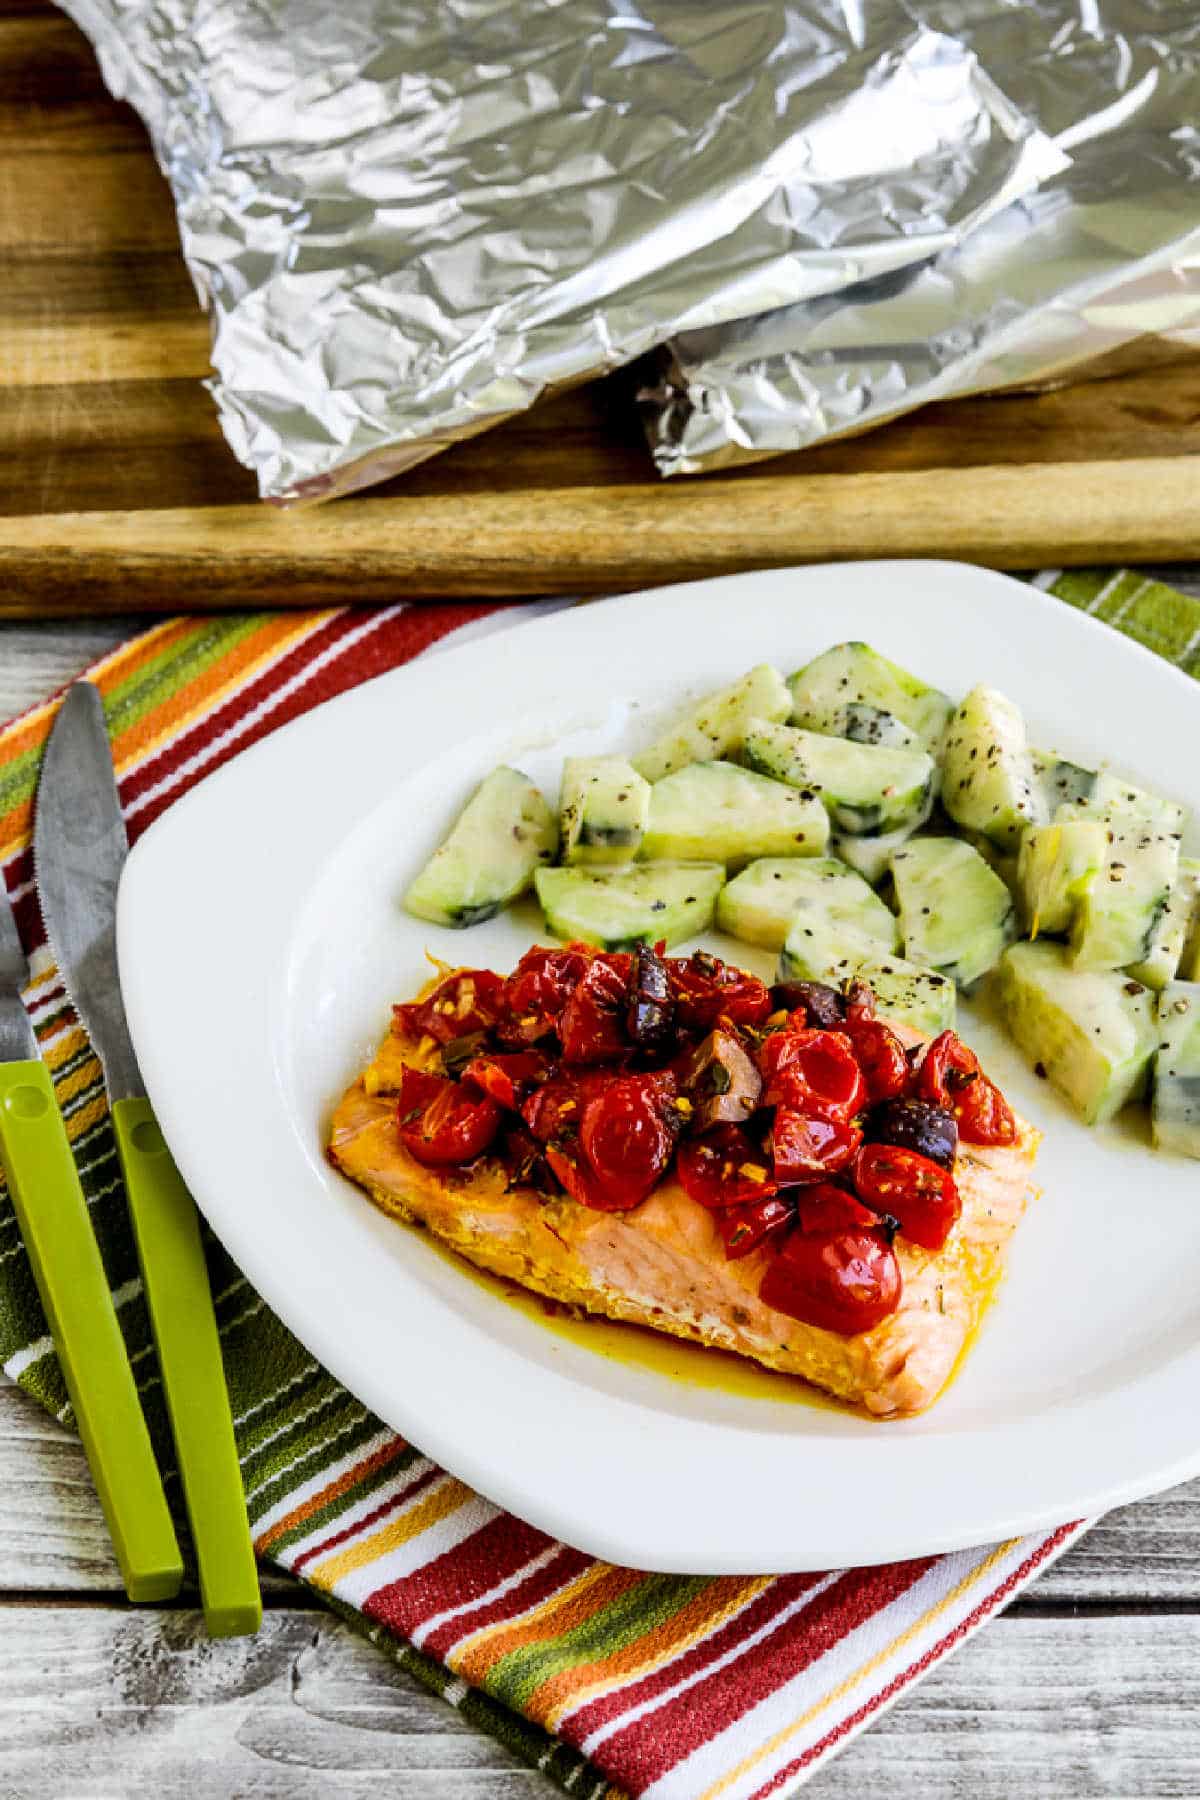 Salmon foil packet with tomatoes and olives on serving plate with pack of salmon on cutting board background